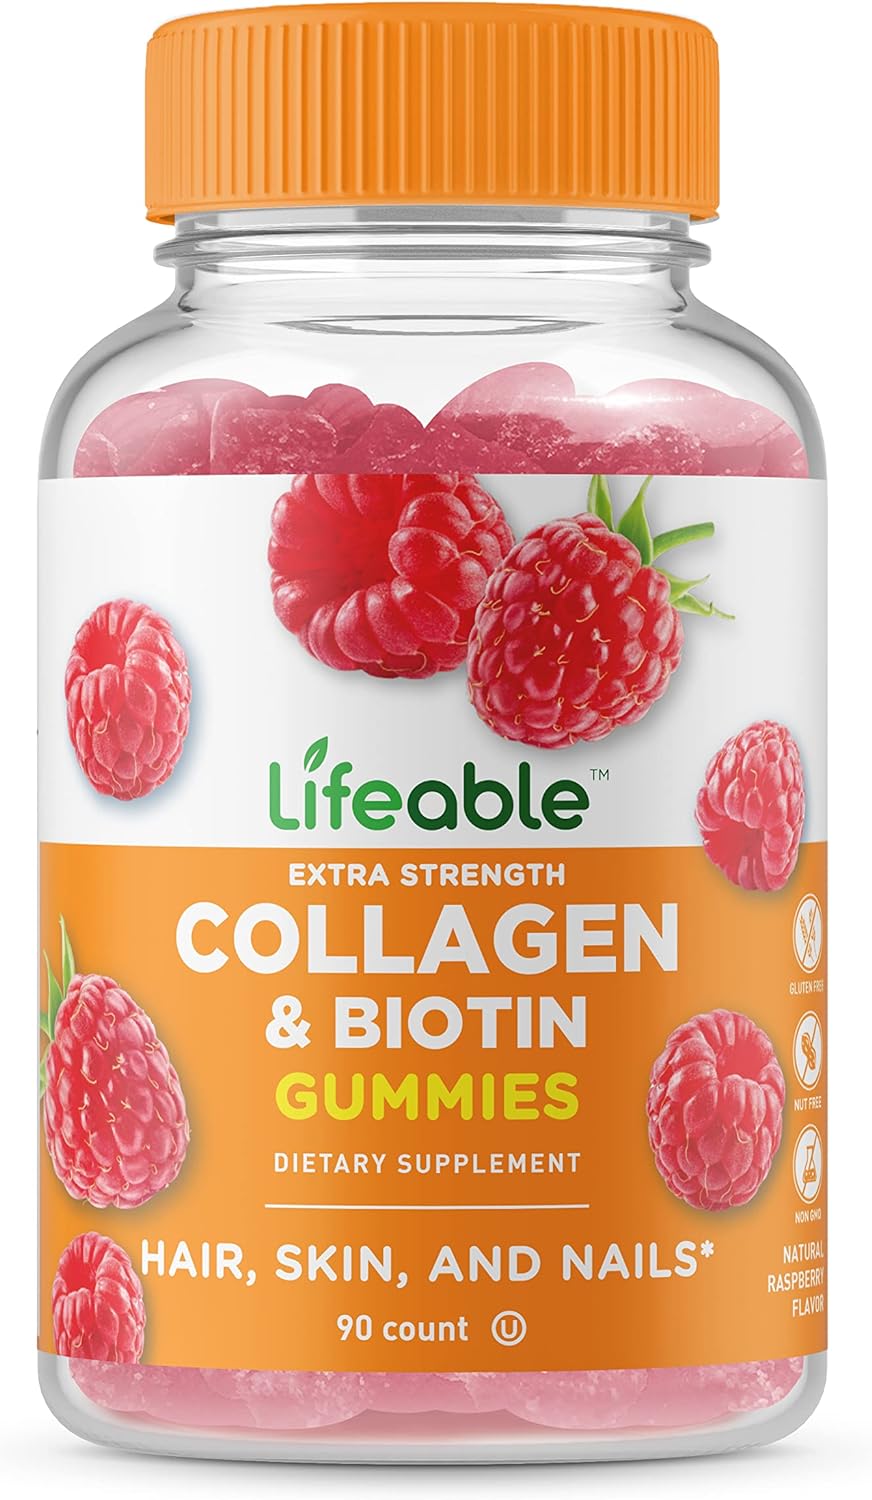 Lifeable Collagen peptides 100mg with Biotin 10000mcg - Great Tasting Natural Flavor Gummy Supplement - Gluten Free, Vegetarian, GMO-Free Chewable - for Hair, Skin and Nails - For Adults - 90 Gummies